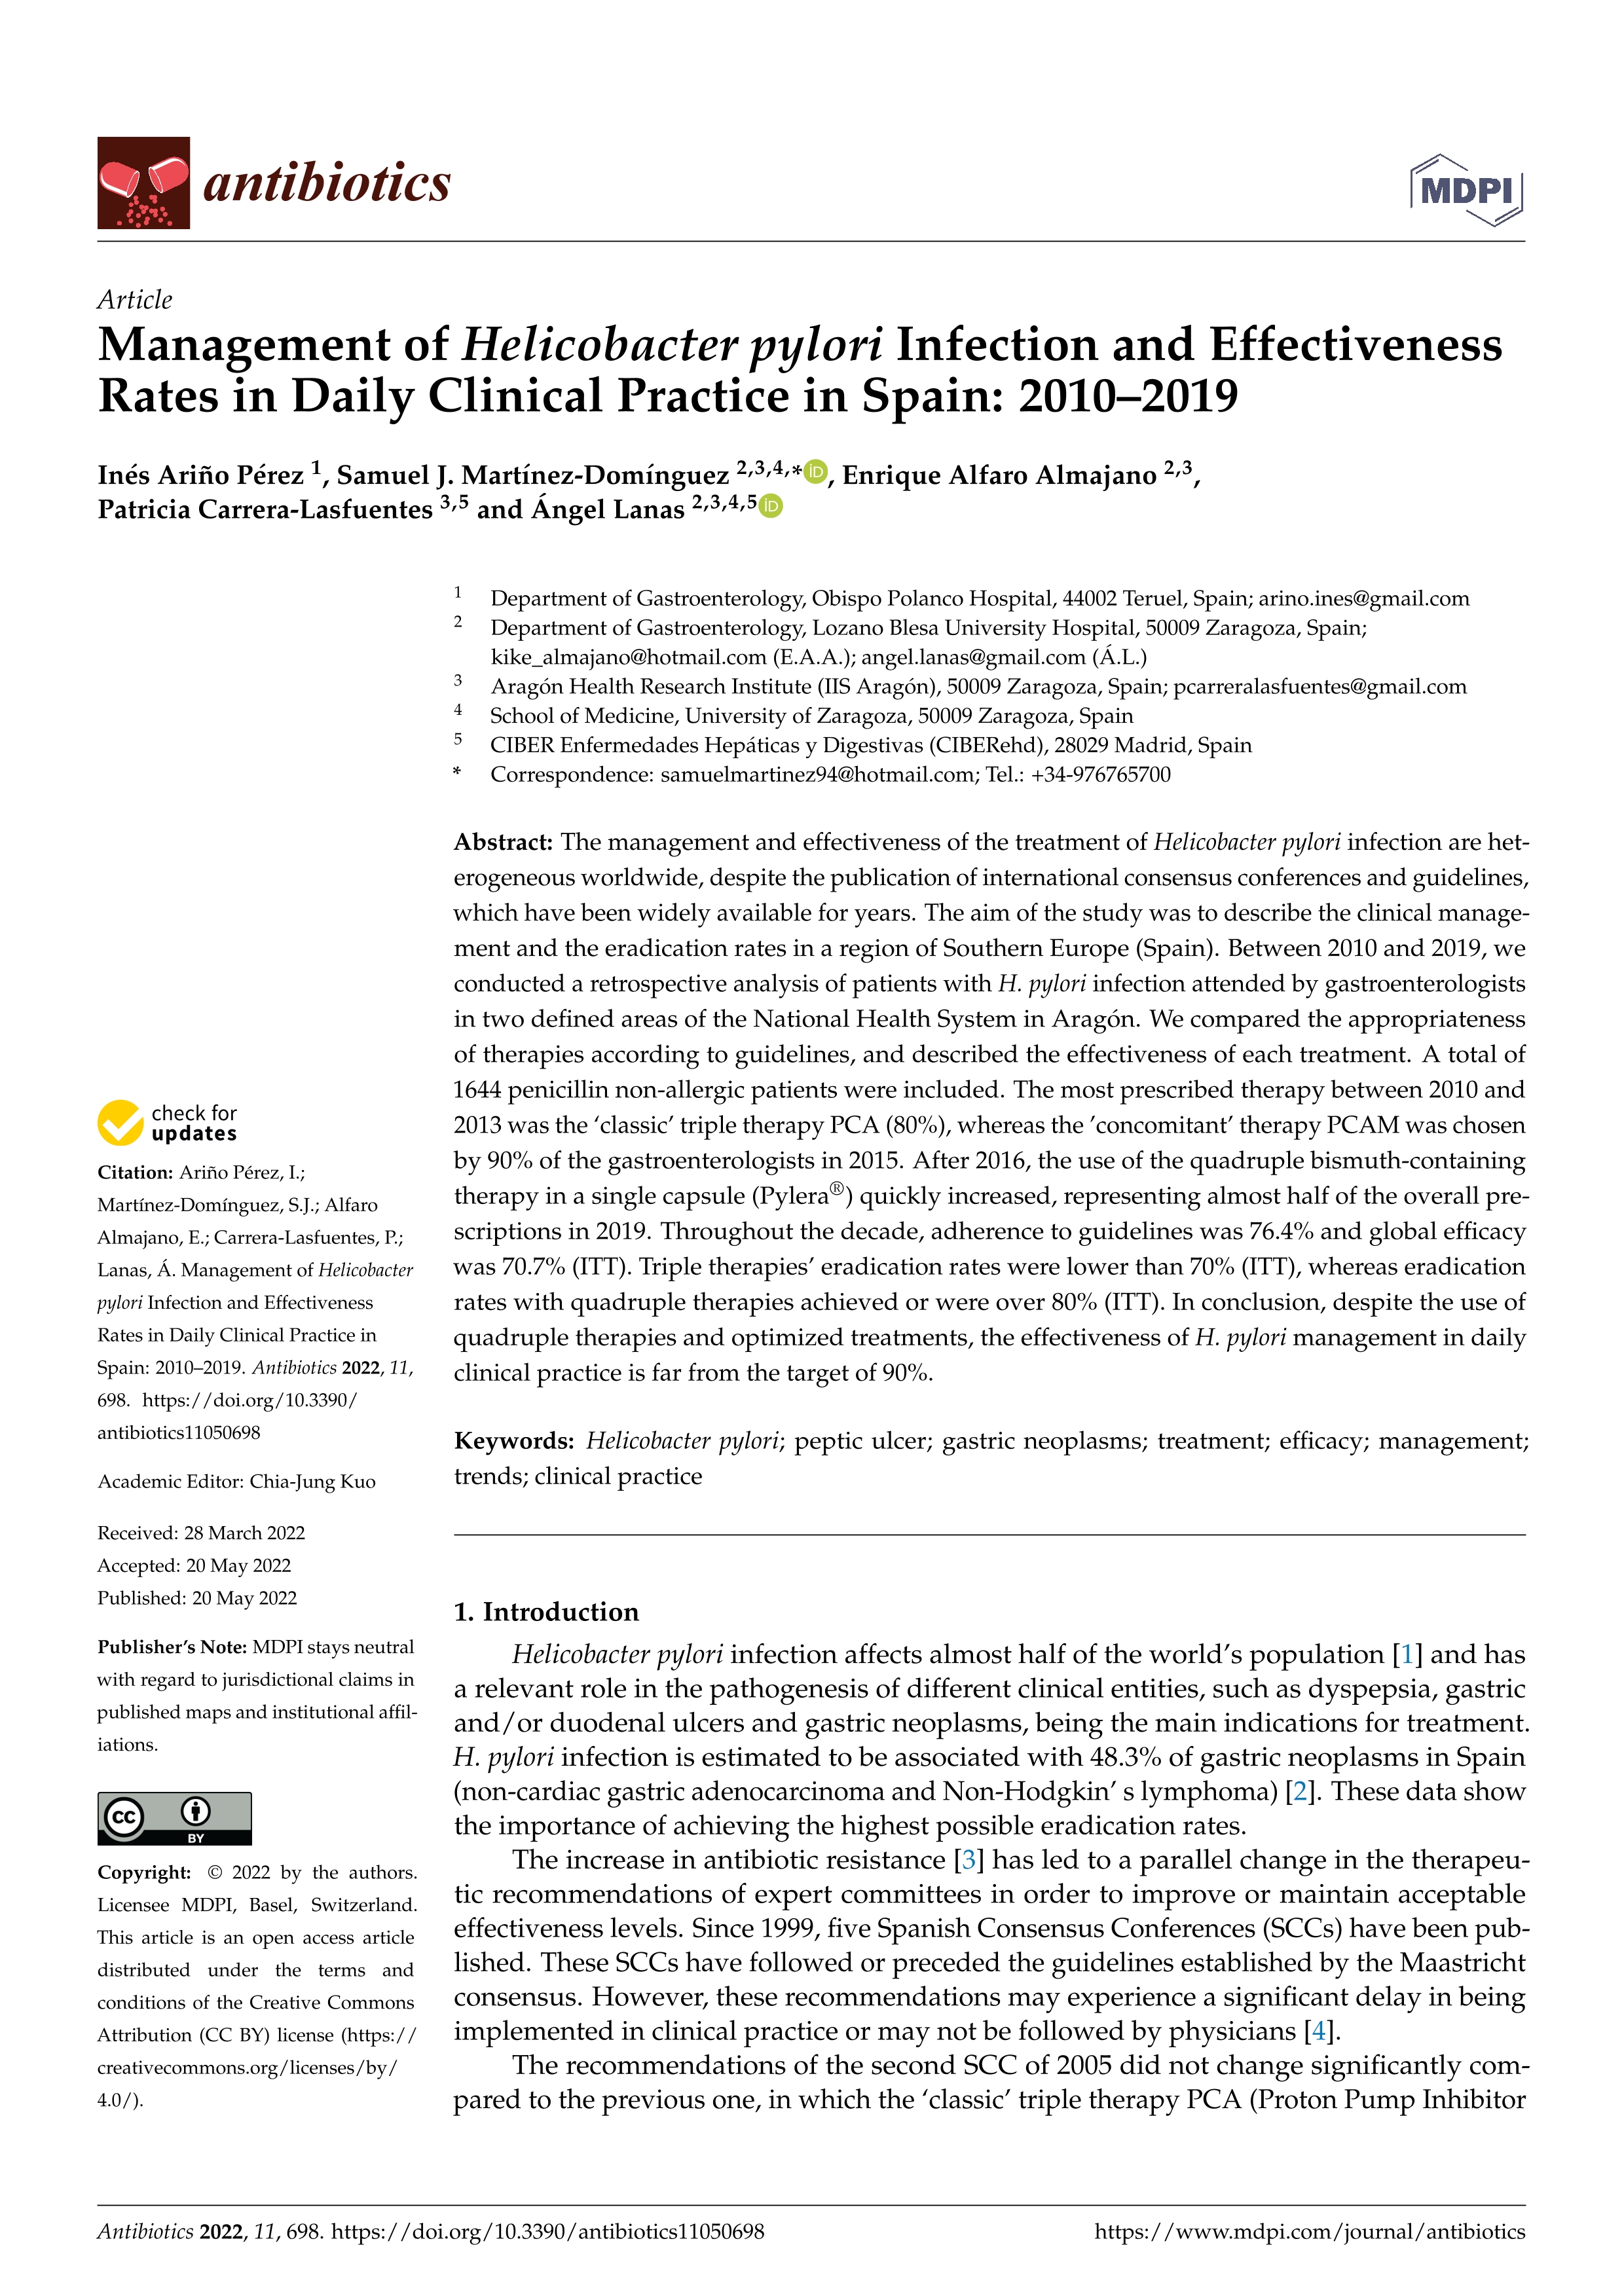 Management of Helicobacter Pylori infection and effectiveness rates in daily clinical practice in Spain: 2010–2019